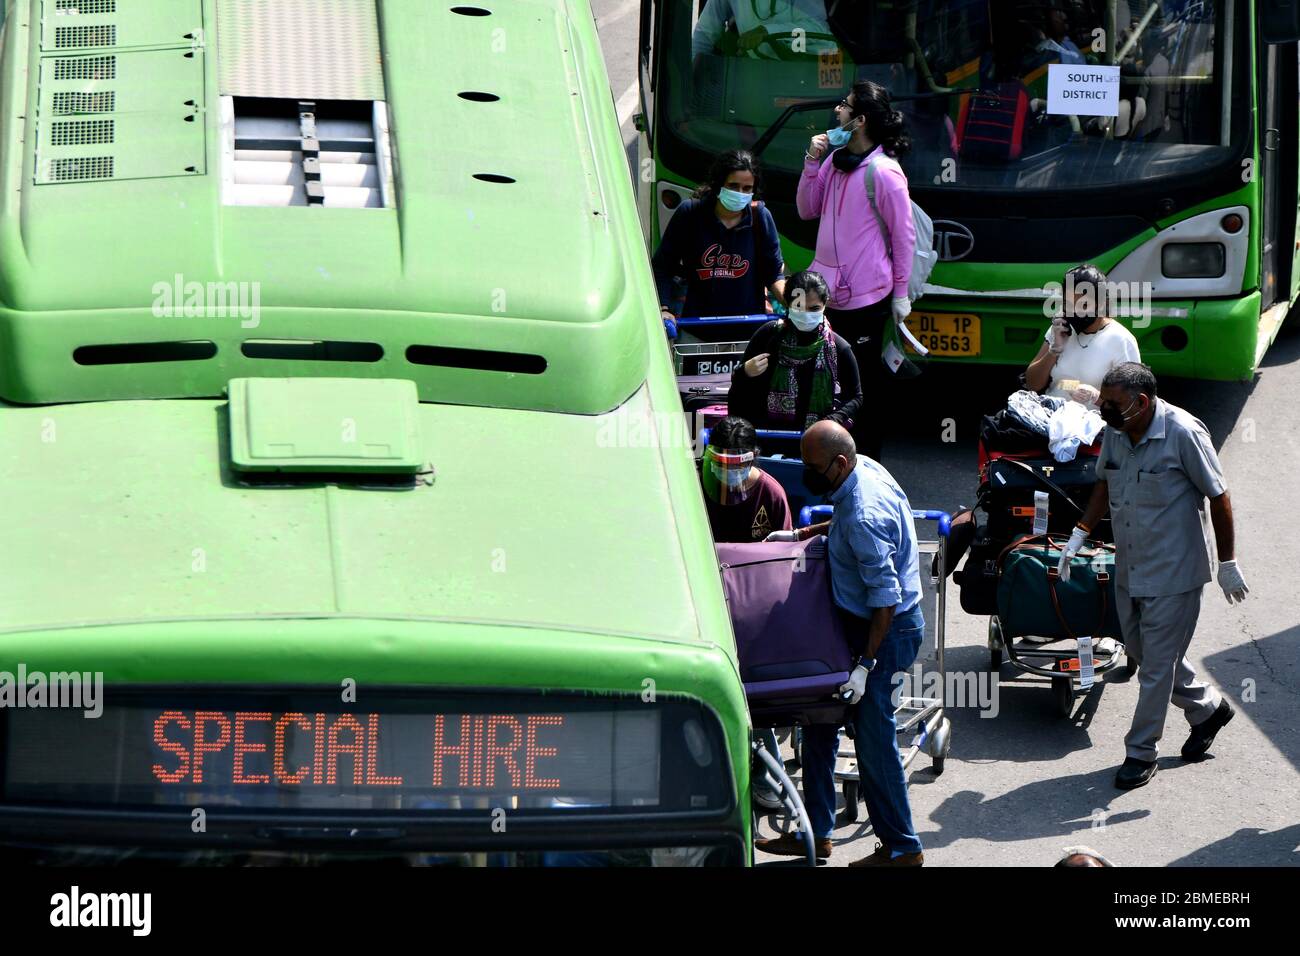 India, India. 8th May, 2020. Stranded Indians arriving from Singapore board buses at an international airport in New Delhi, India, on May 8, 2020. The flights bringing back stranded Indians from abroad have begun to arrive in India, officials said Friday. Credit: Partha Sarkar/Xinhua/Alamy Live News Stock Photo